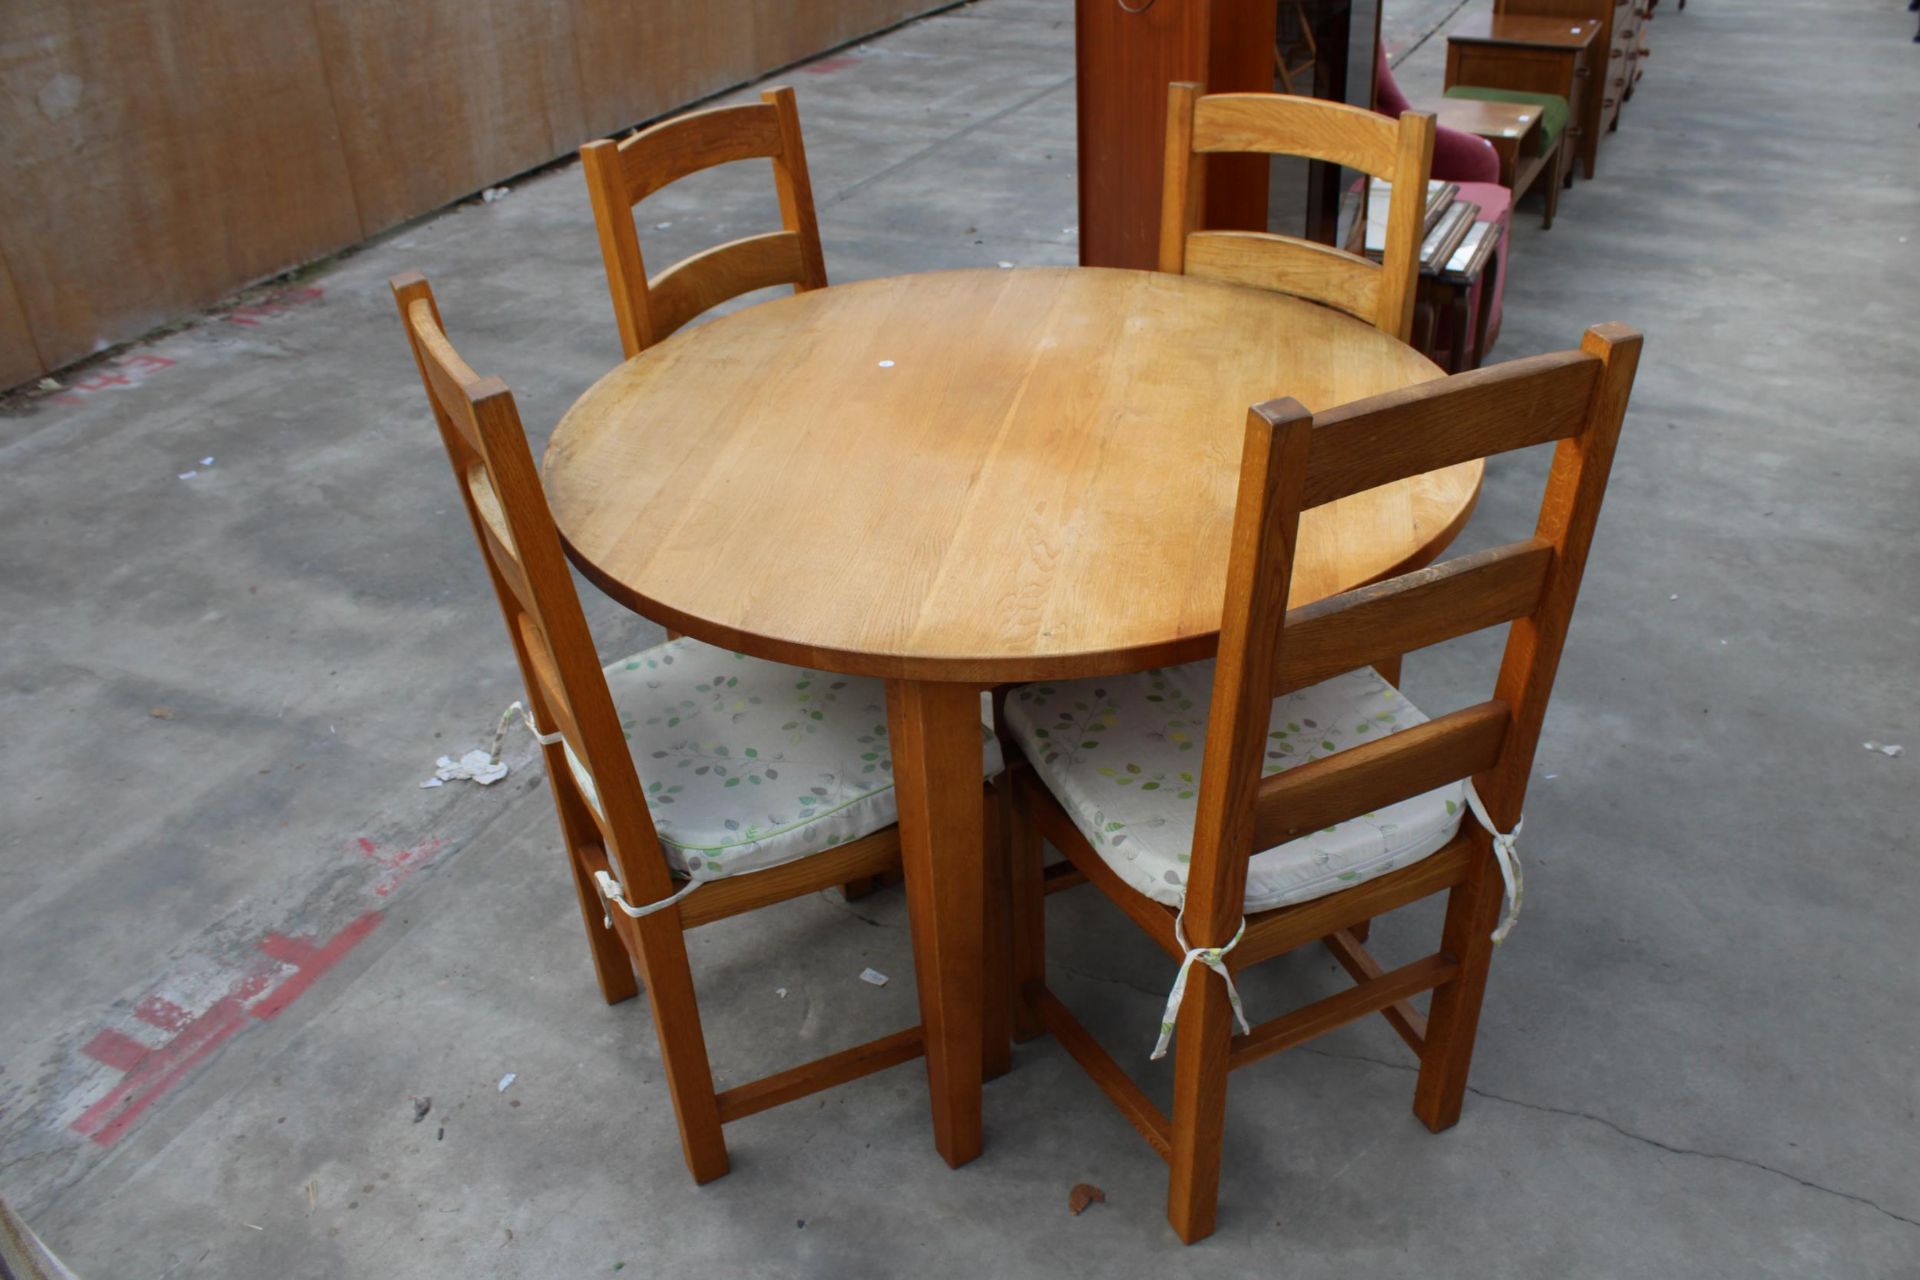 A CIRCULAR OAK DINING TABLE, WITH FOUR OAK LADDER BACK DINING CHAIRS WITH RUSH SEATS, DIAMETER 111CM